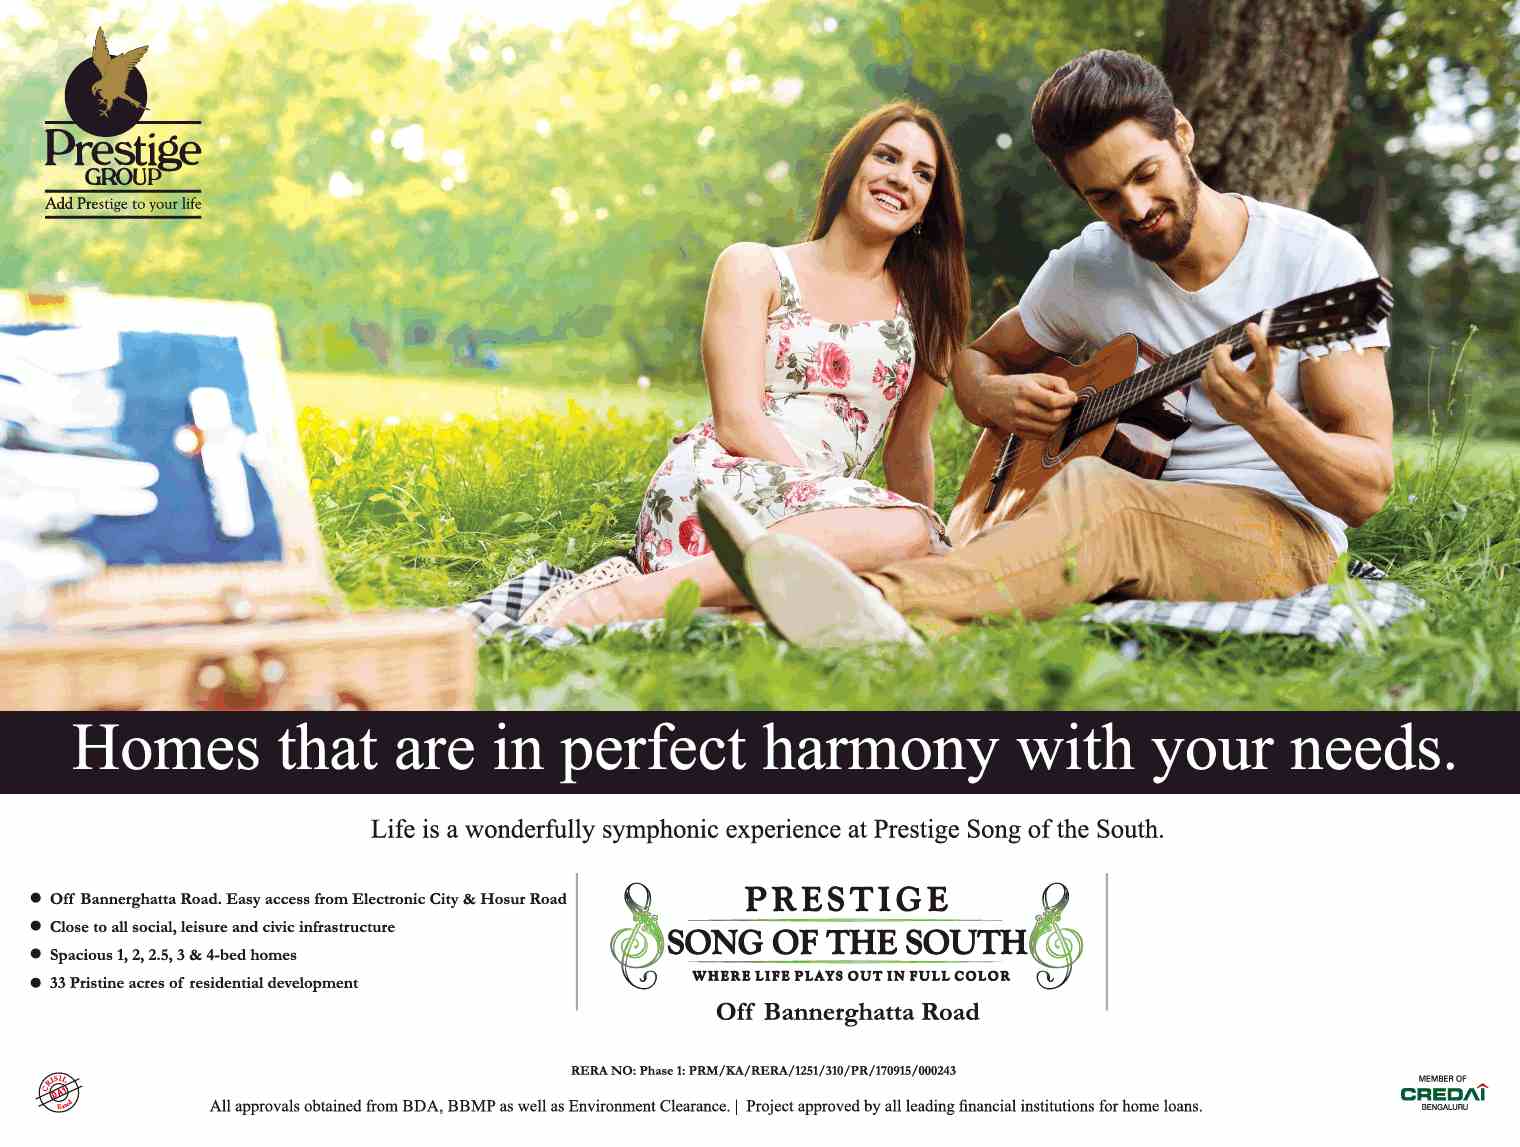 Book home that is in perfect harmony with your needs at Prestige Song Of The South, Bangalore